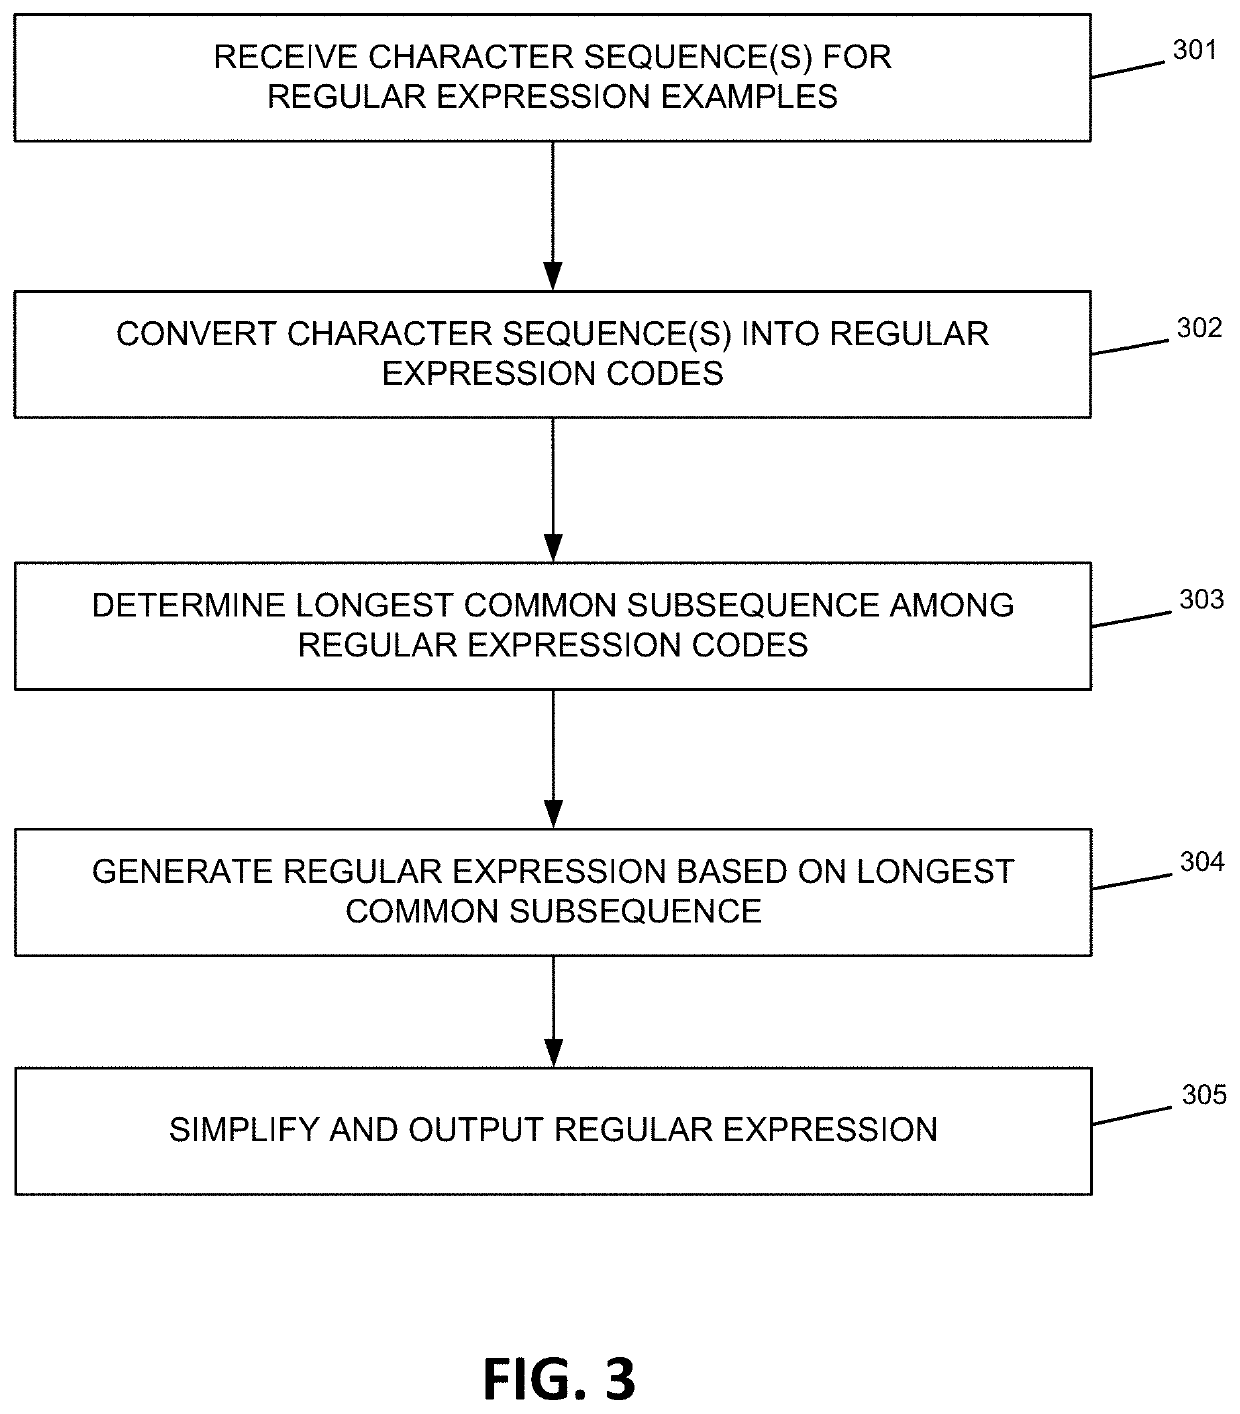 Regular expression generation using longest common subsequence algorithm on combinations of regular expression codes